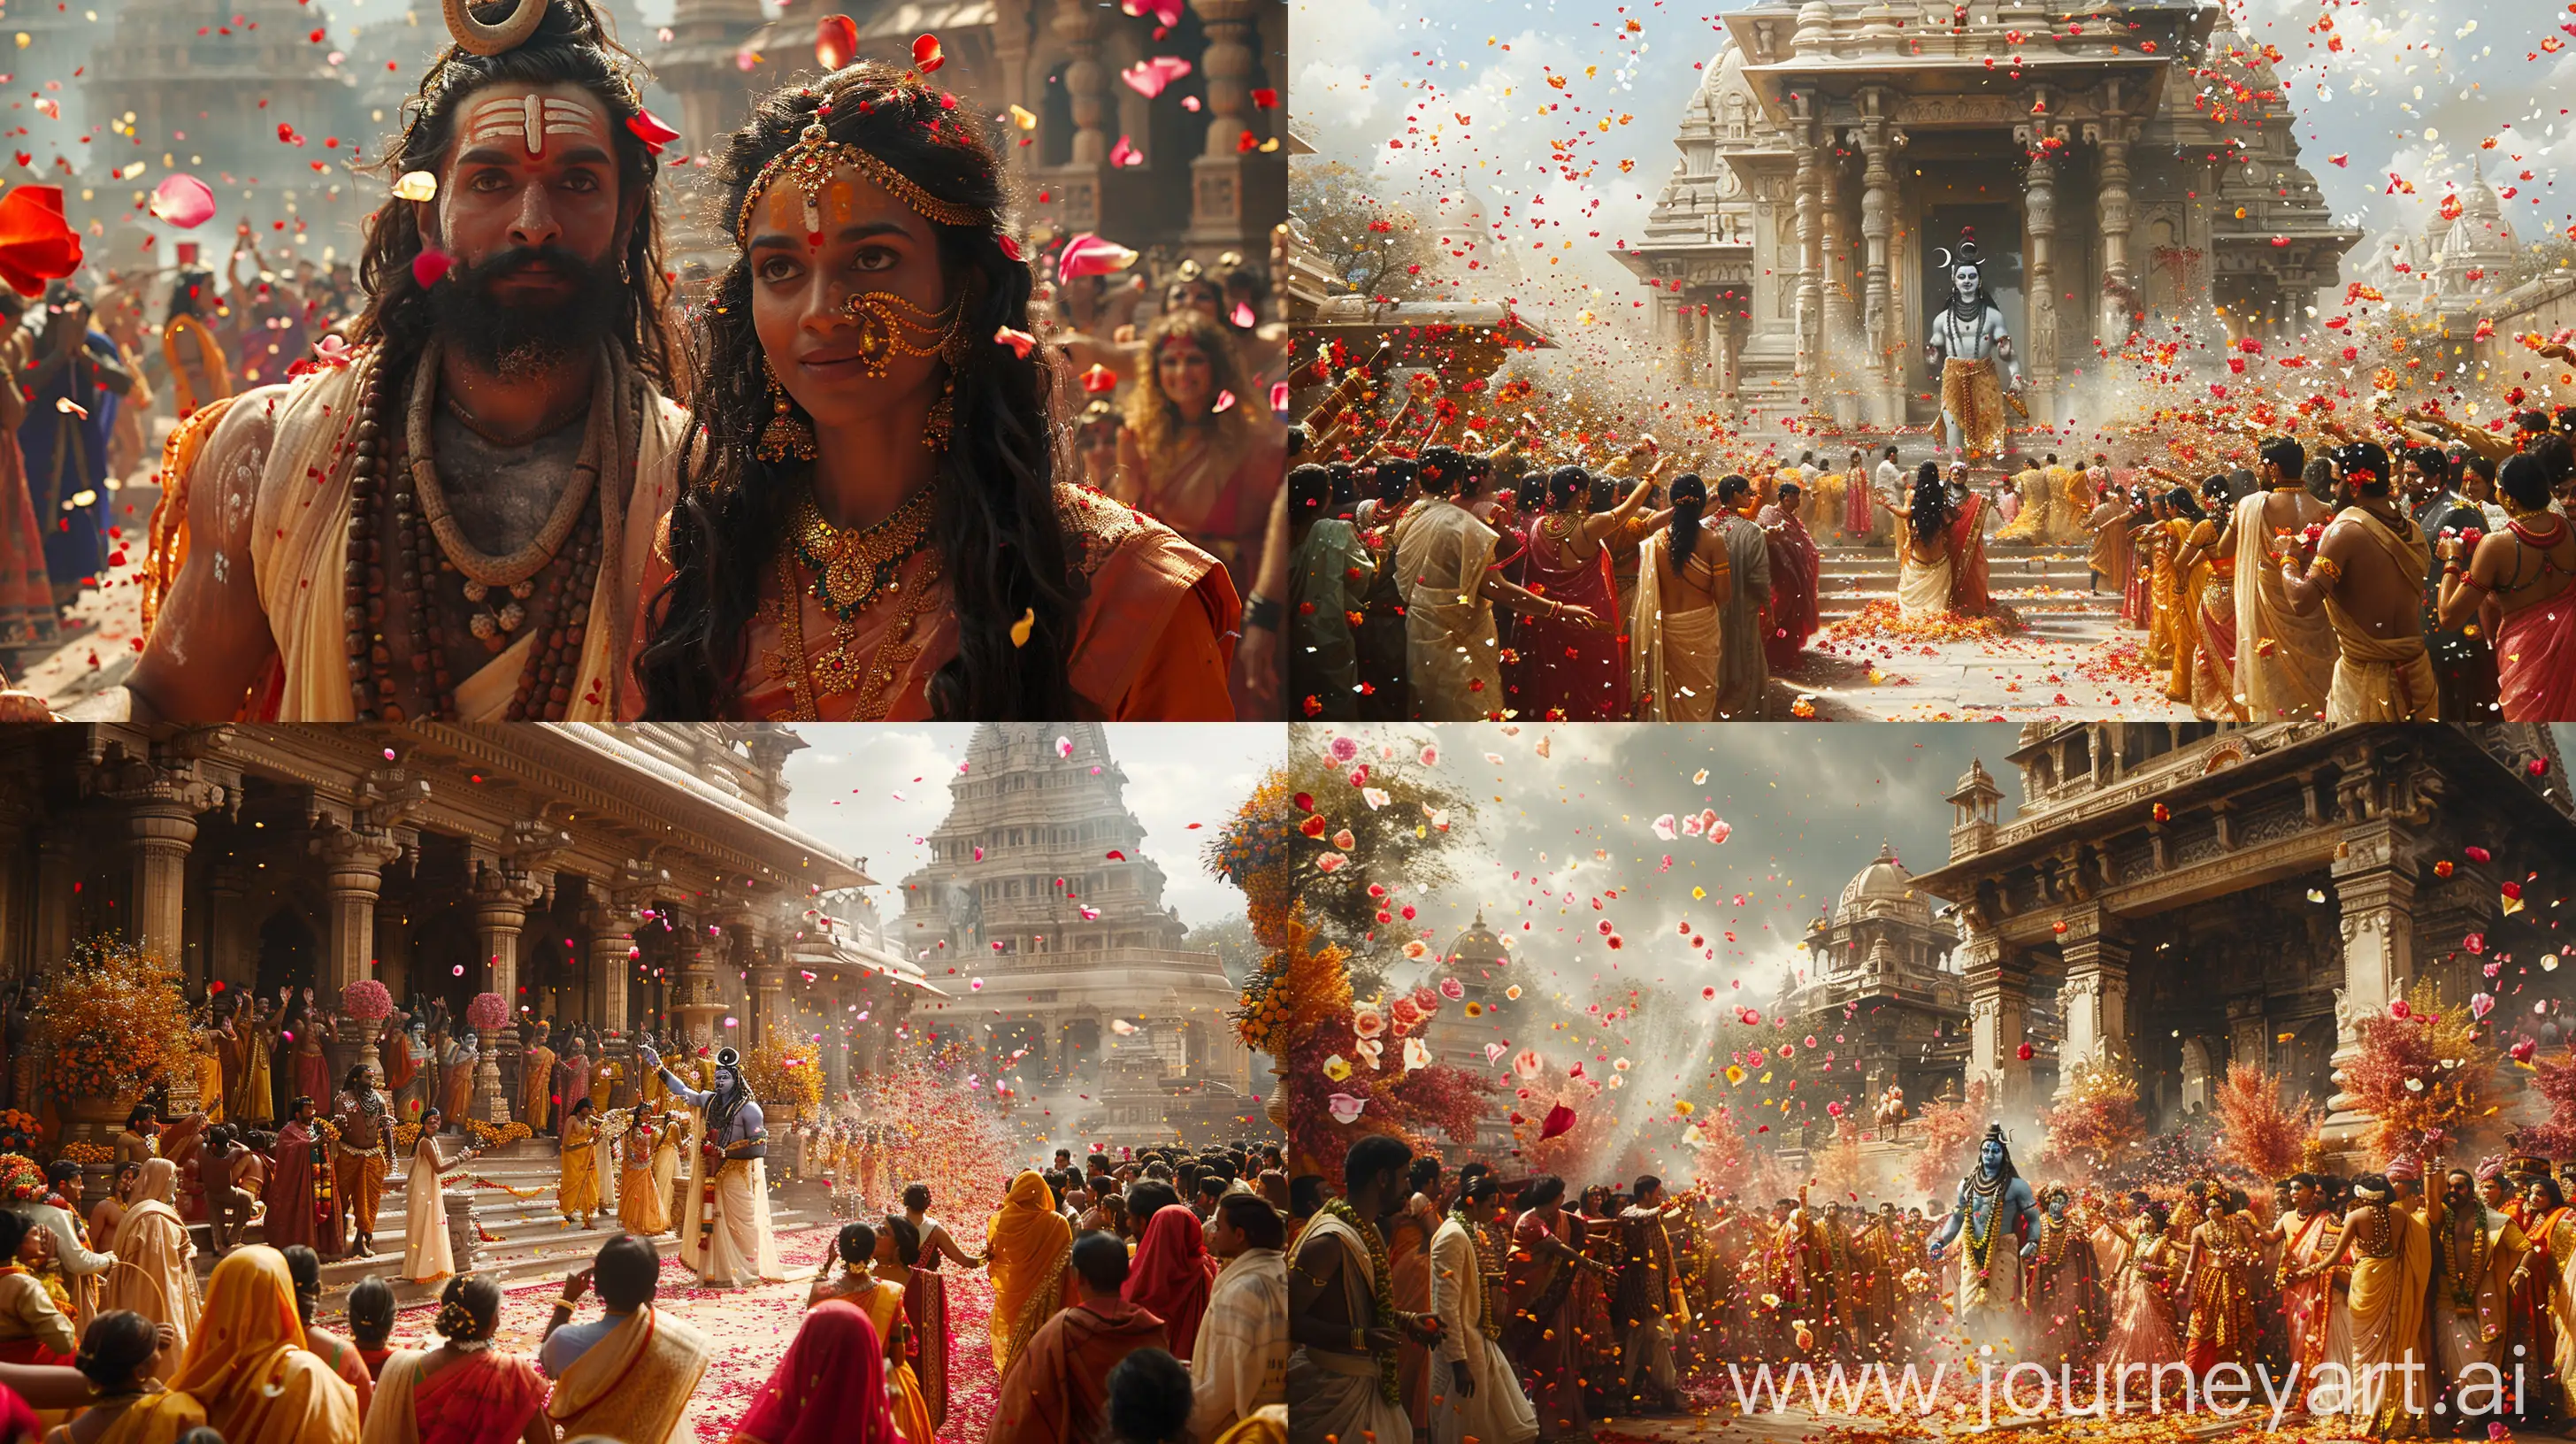 Lavish wedding ceremony of Hindu gods Lord Shiva and Goddess Parvati, celebrated during Maha Shivaratri, crowds of devotees tossing myriad rose petals and fragrant flowers from above, auspicious, vivid colors, intricate traditional Indian attire, ornate gold jewelry, grand temple backdrop, ancient mythological essence captured in a grandiose Rajasthani miniature painting style, detailed festive atmosphere --aspect 16:9 --stylize 750 --chaos 15 --v 6